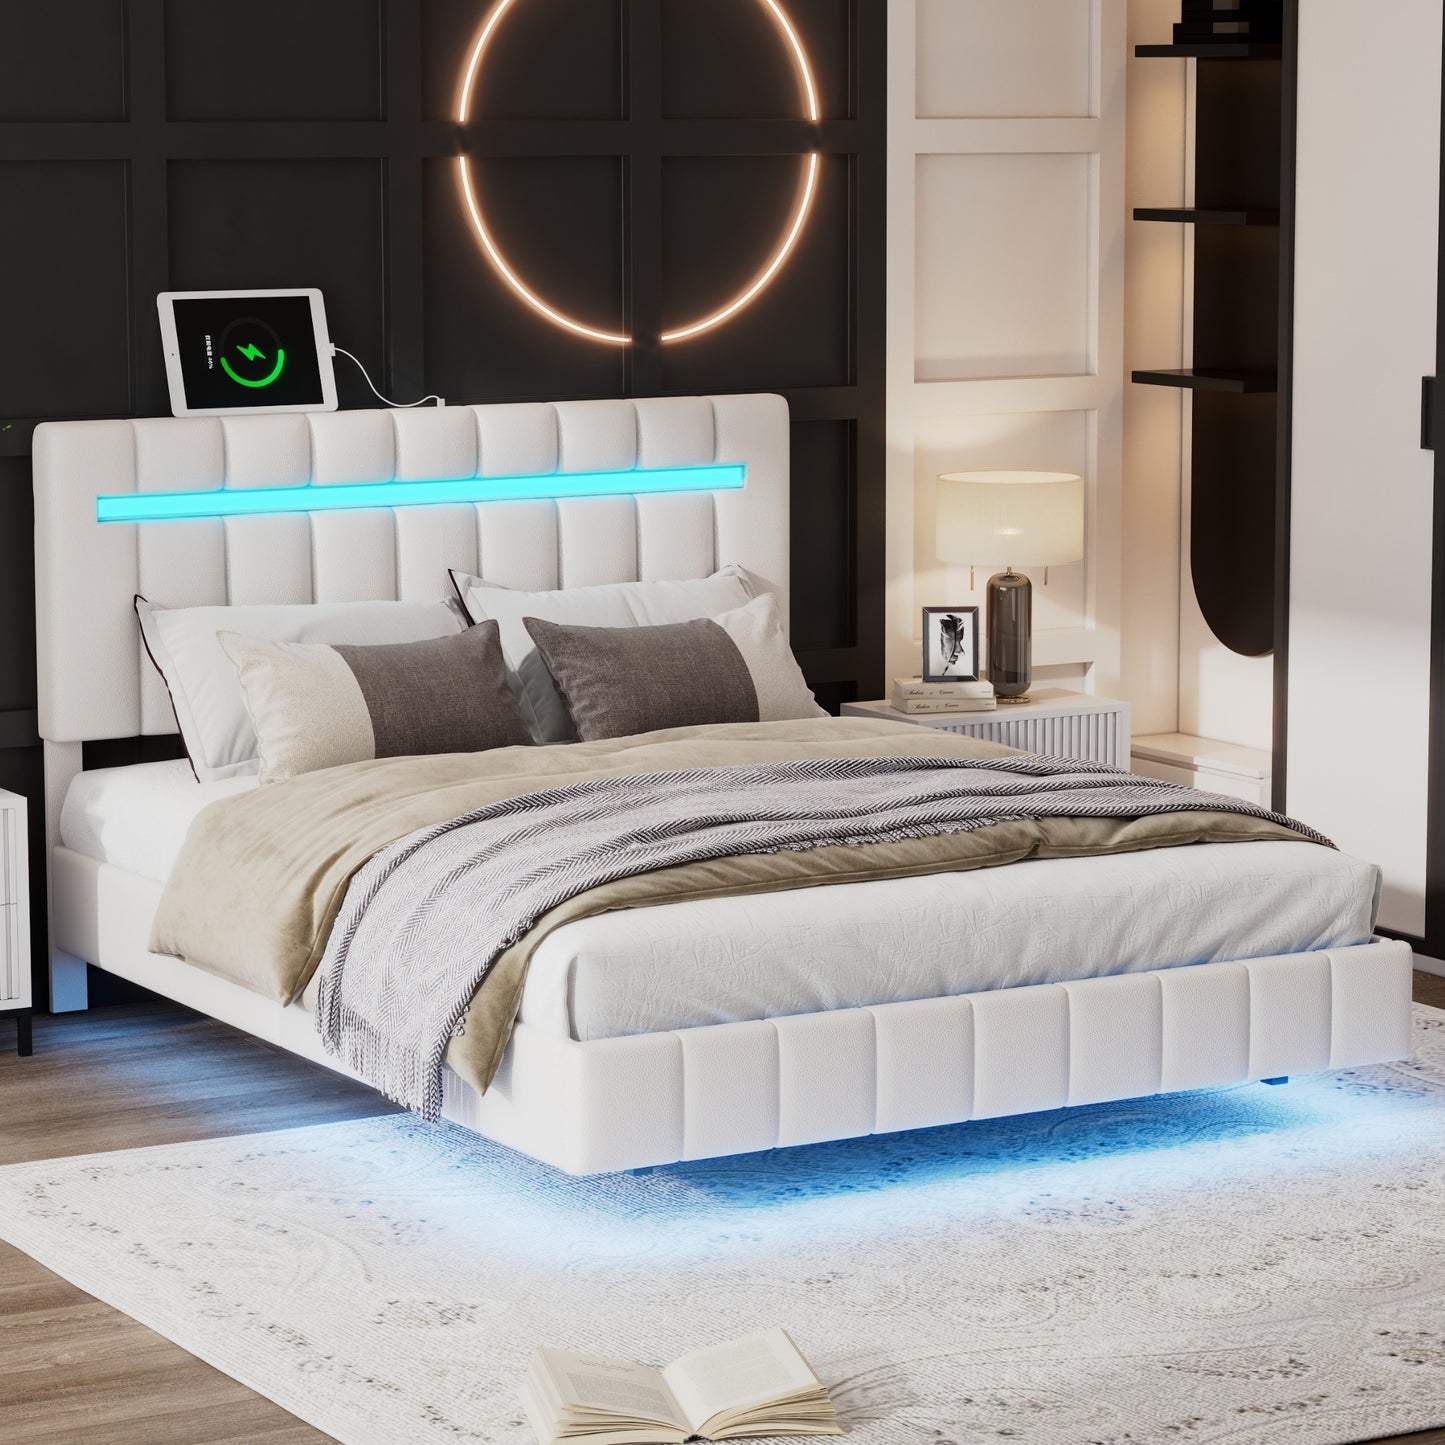 floating bed frame with led lights and usb charging